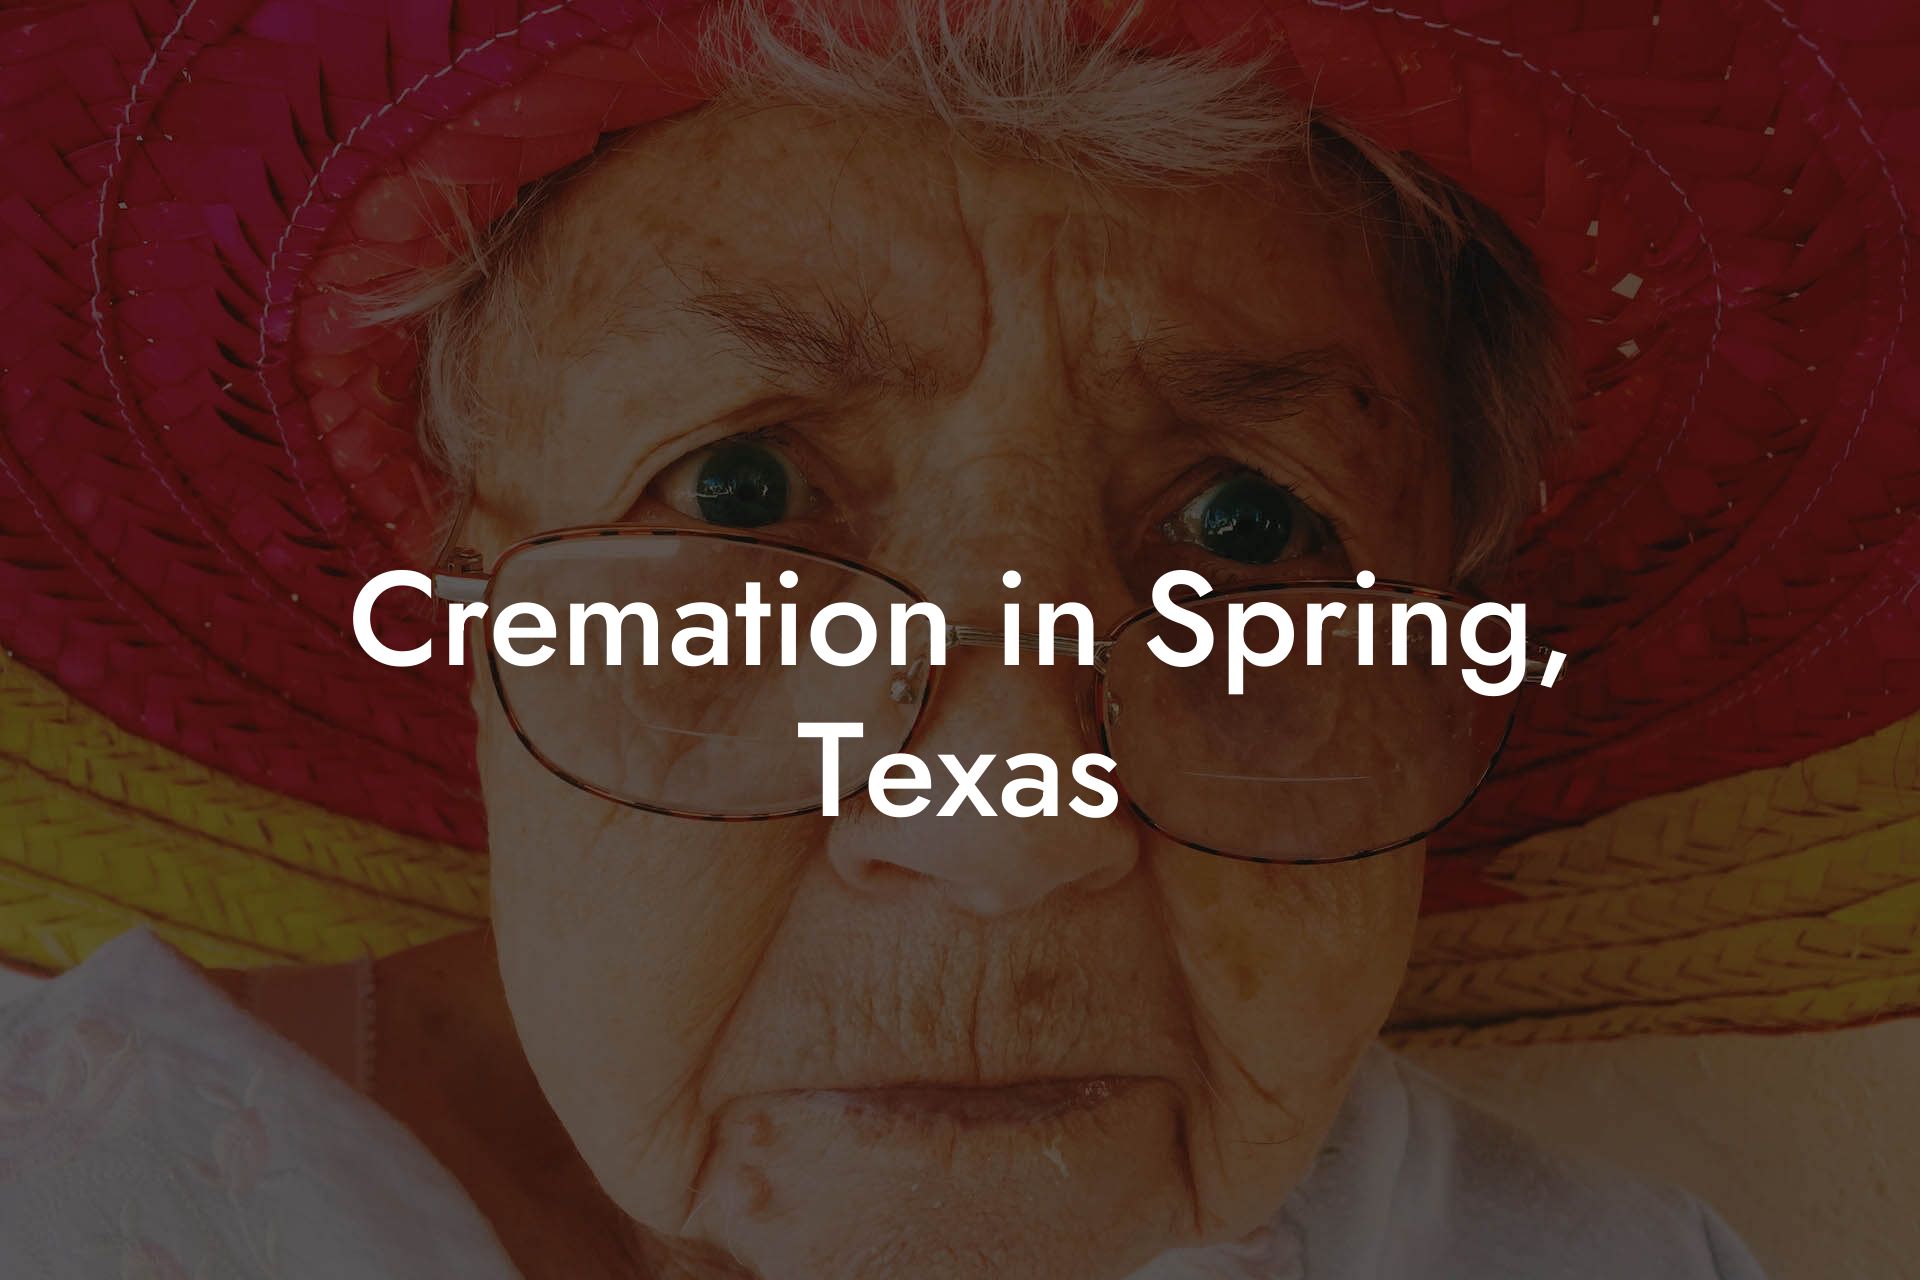 Cremation in Spring, Texas